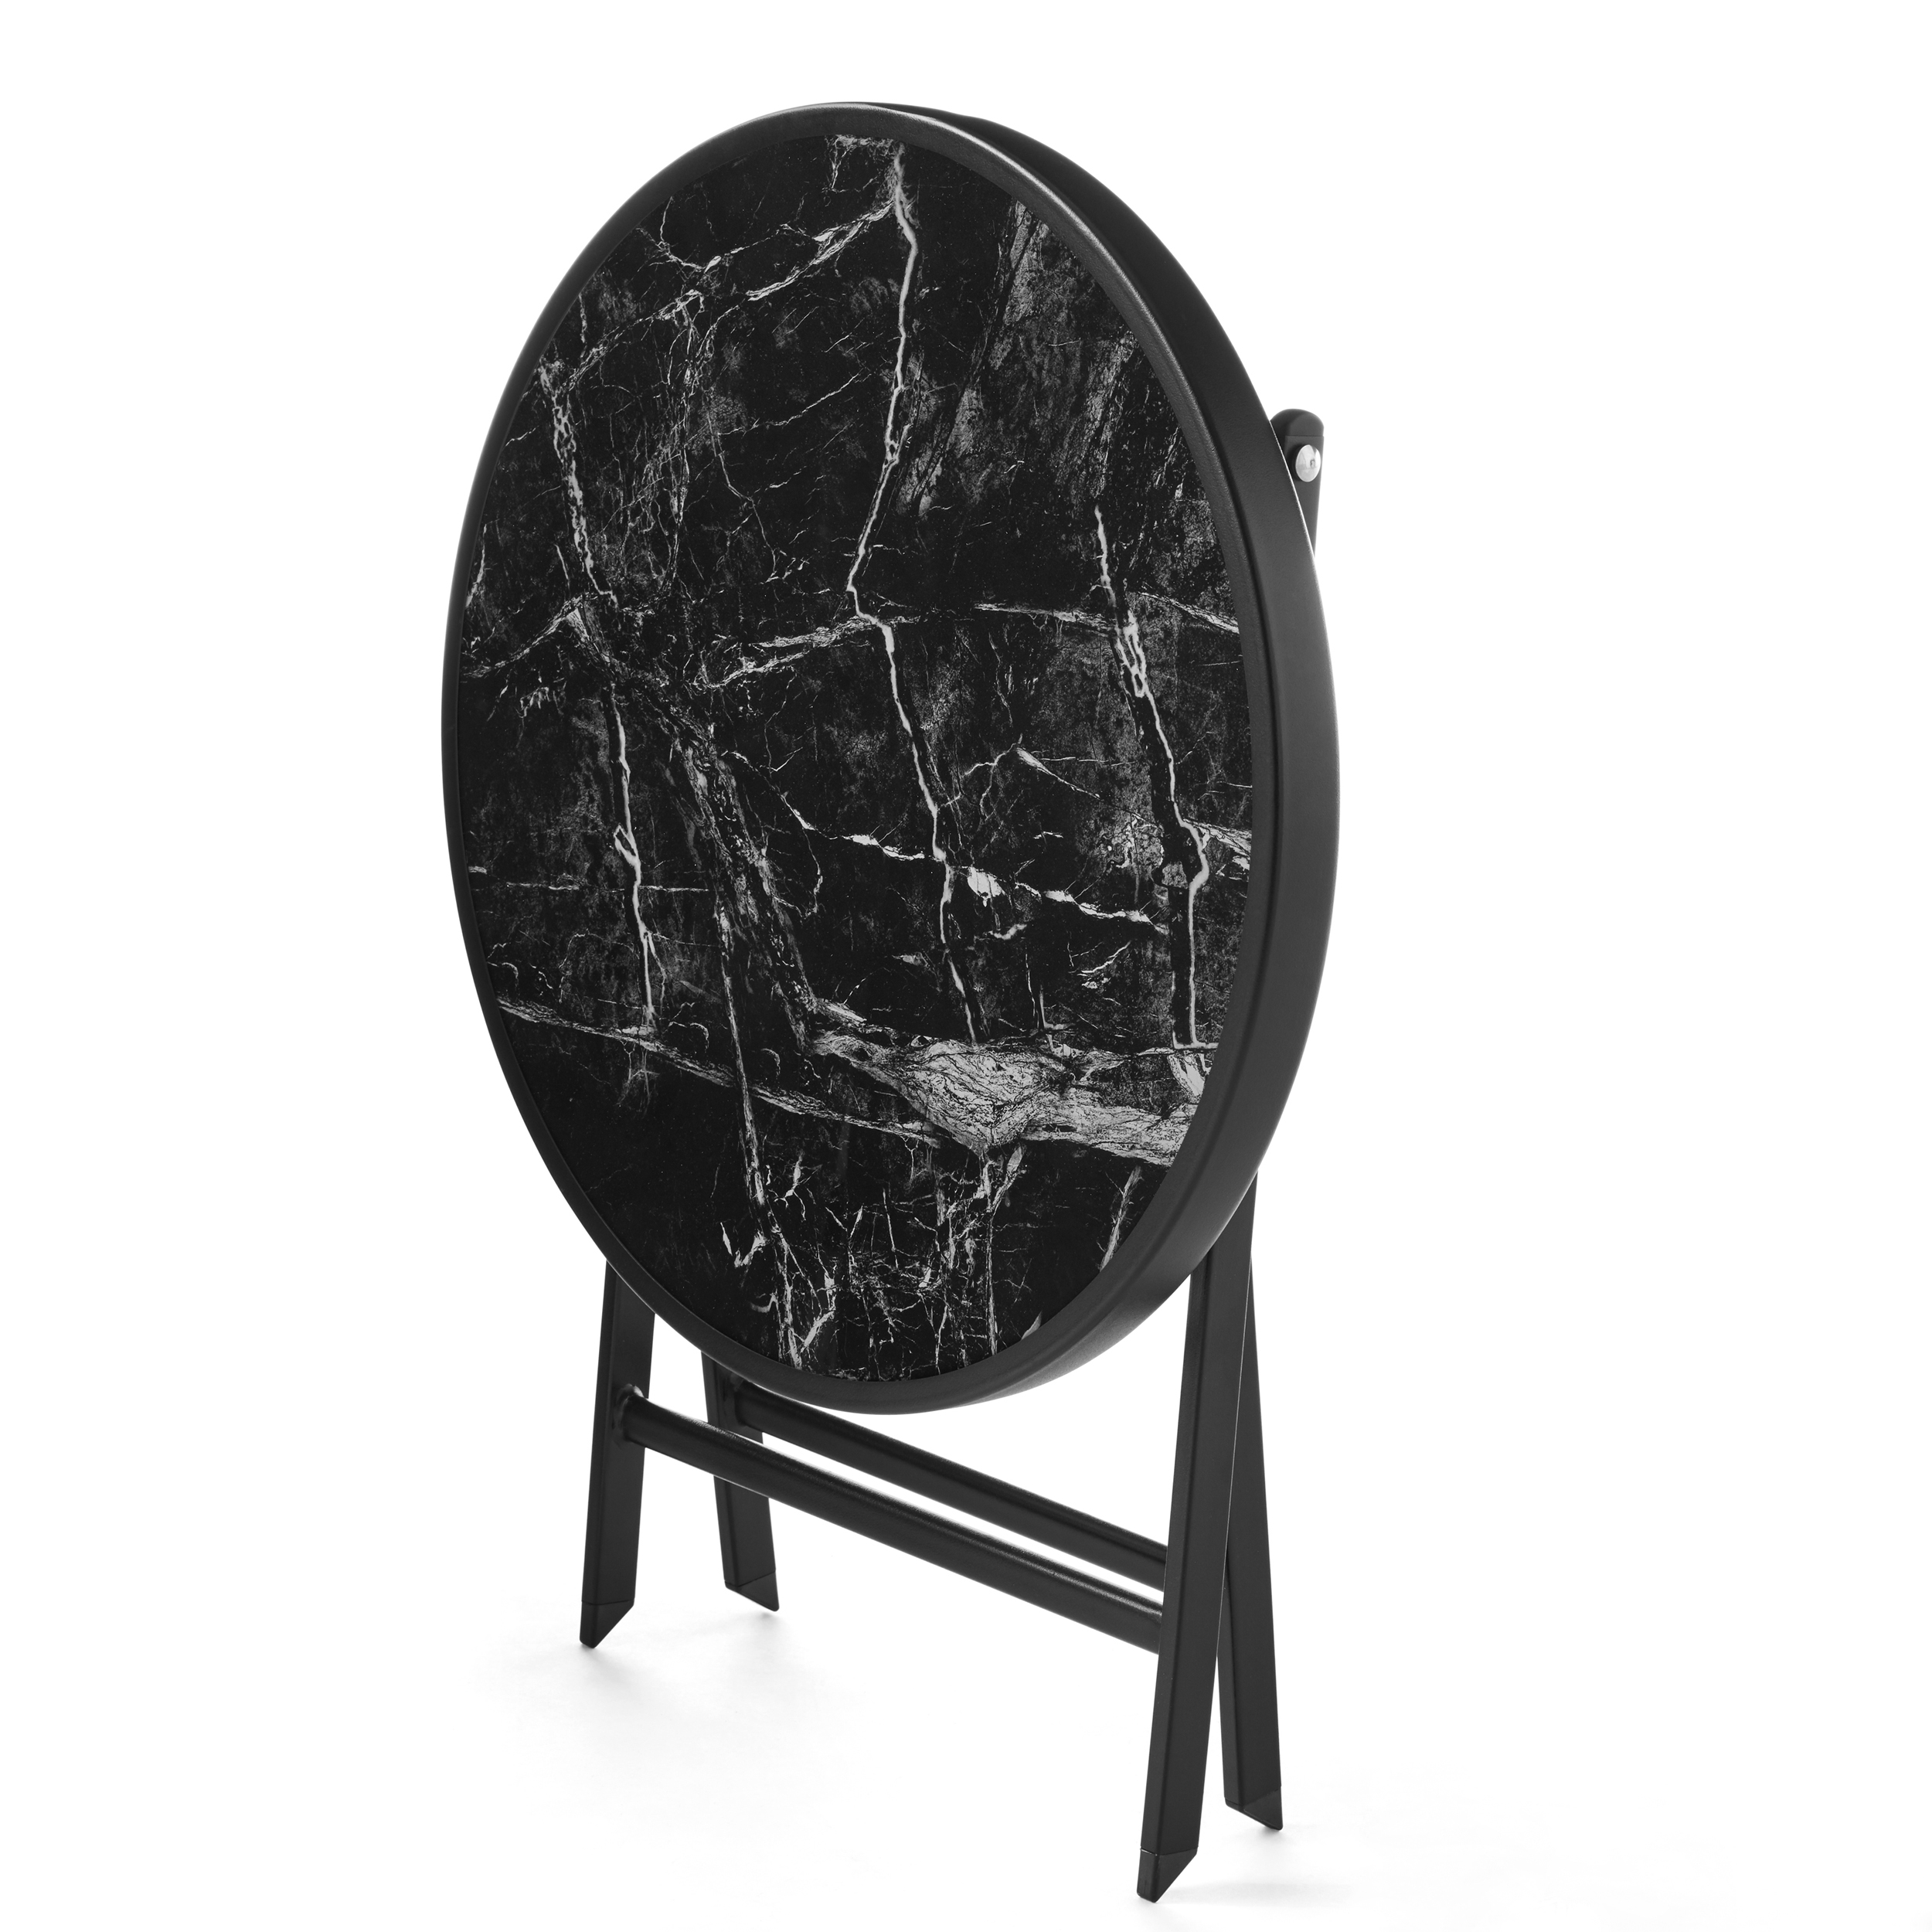 Mainstays 18" Greyson Square Black Marble Steel Round Folding Table - image 3 of 6